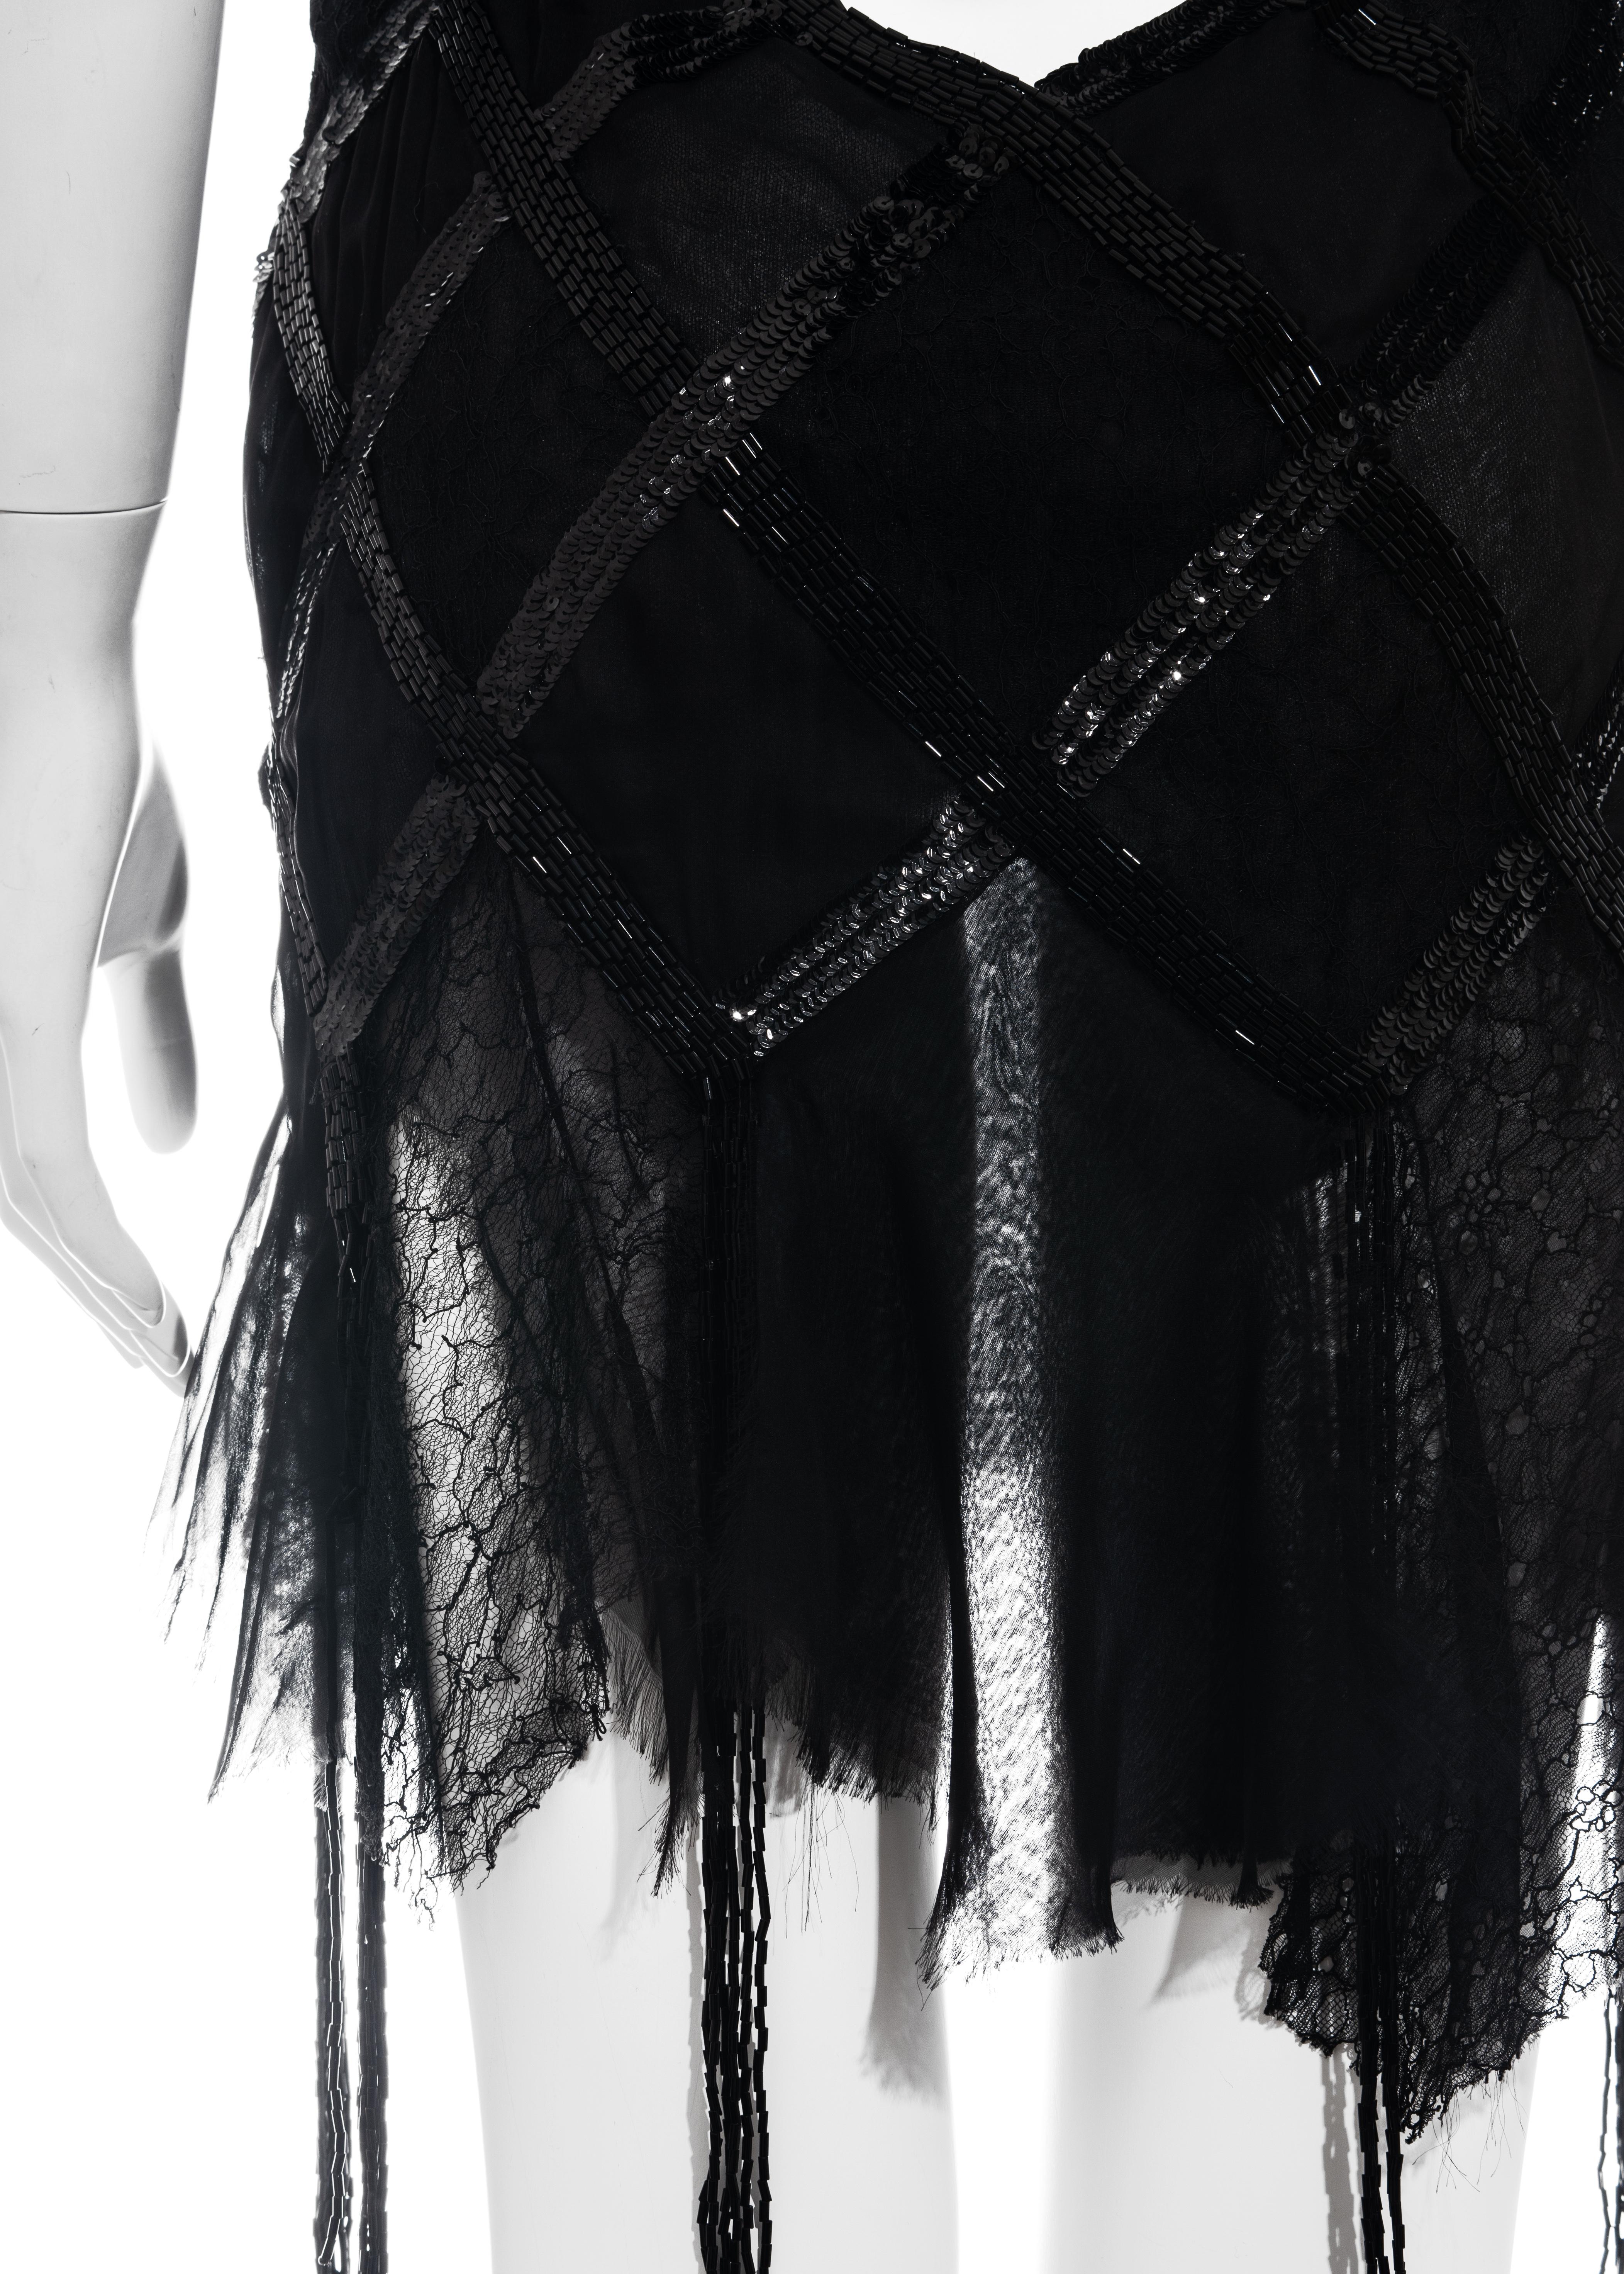 Black Gianni Versace black silk and lace beaded mini dress, c. 2003 For Sale